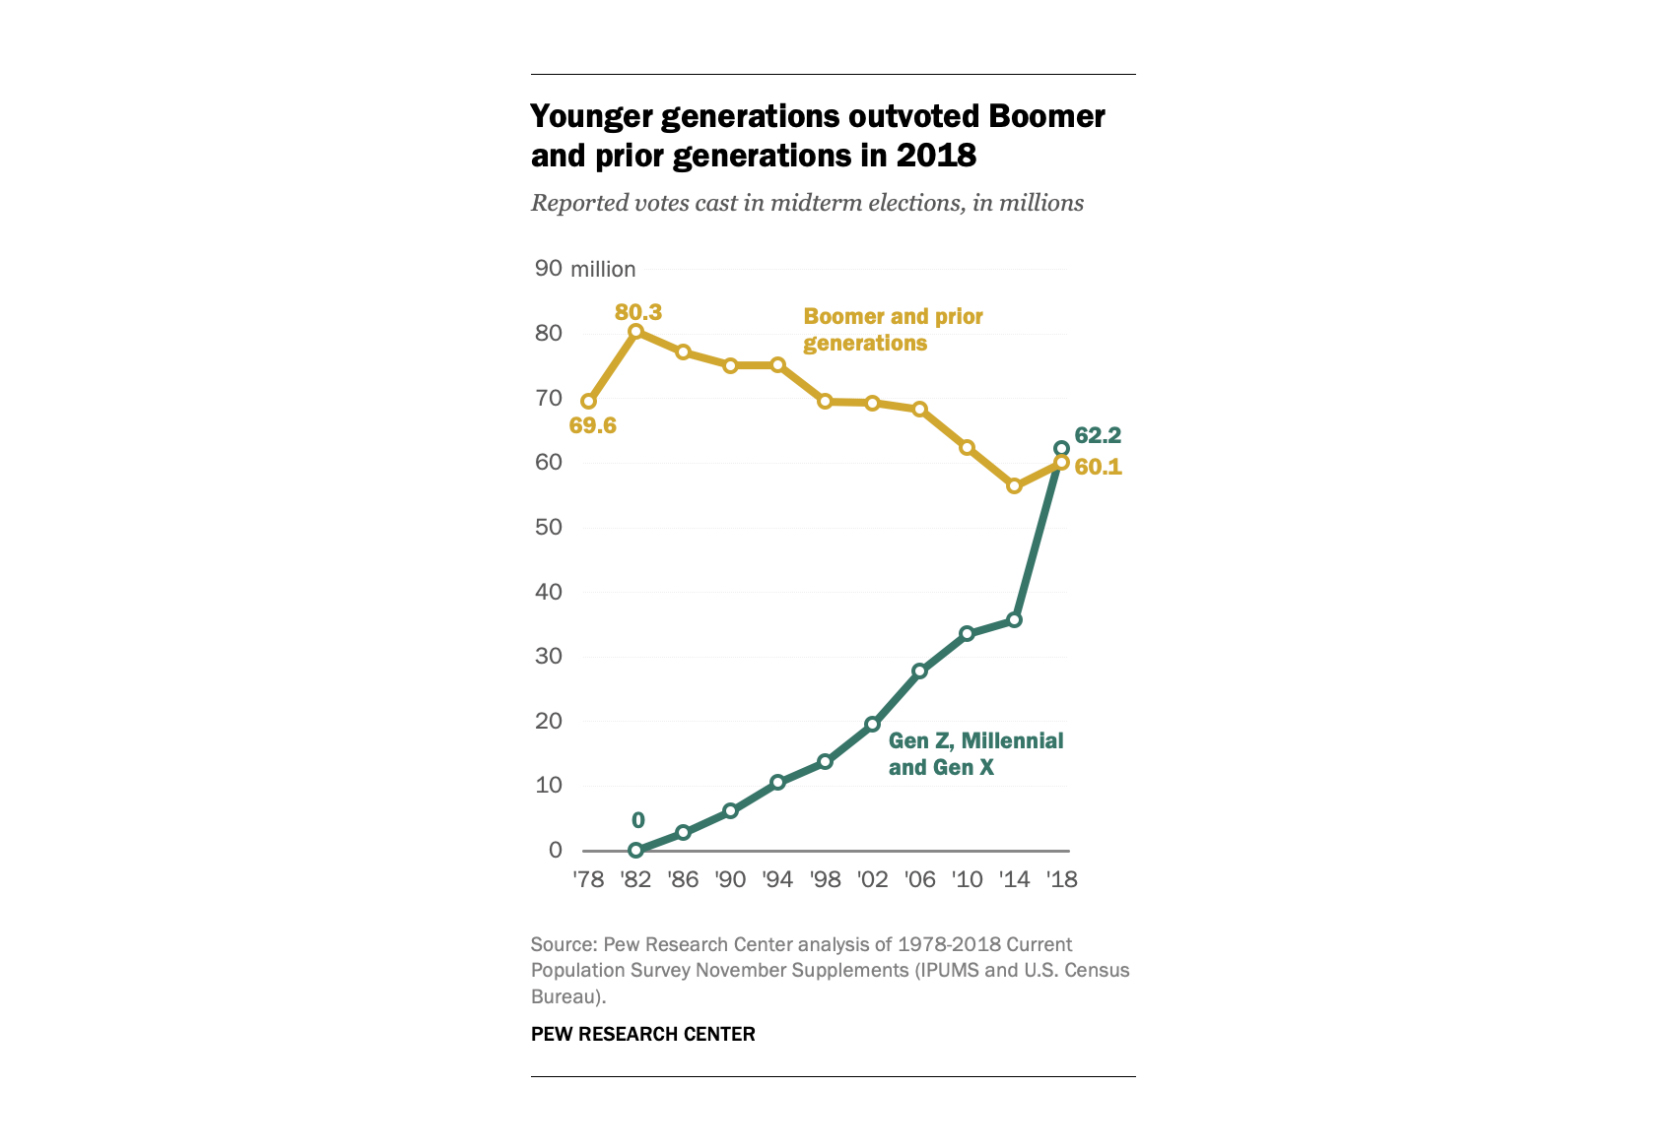 PHOTO: Younger generations outvoted Boomer and prior generations in 2018.